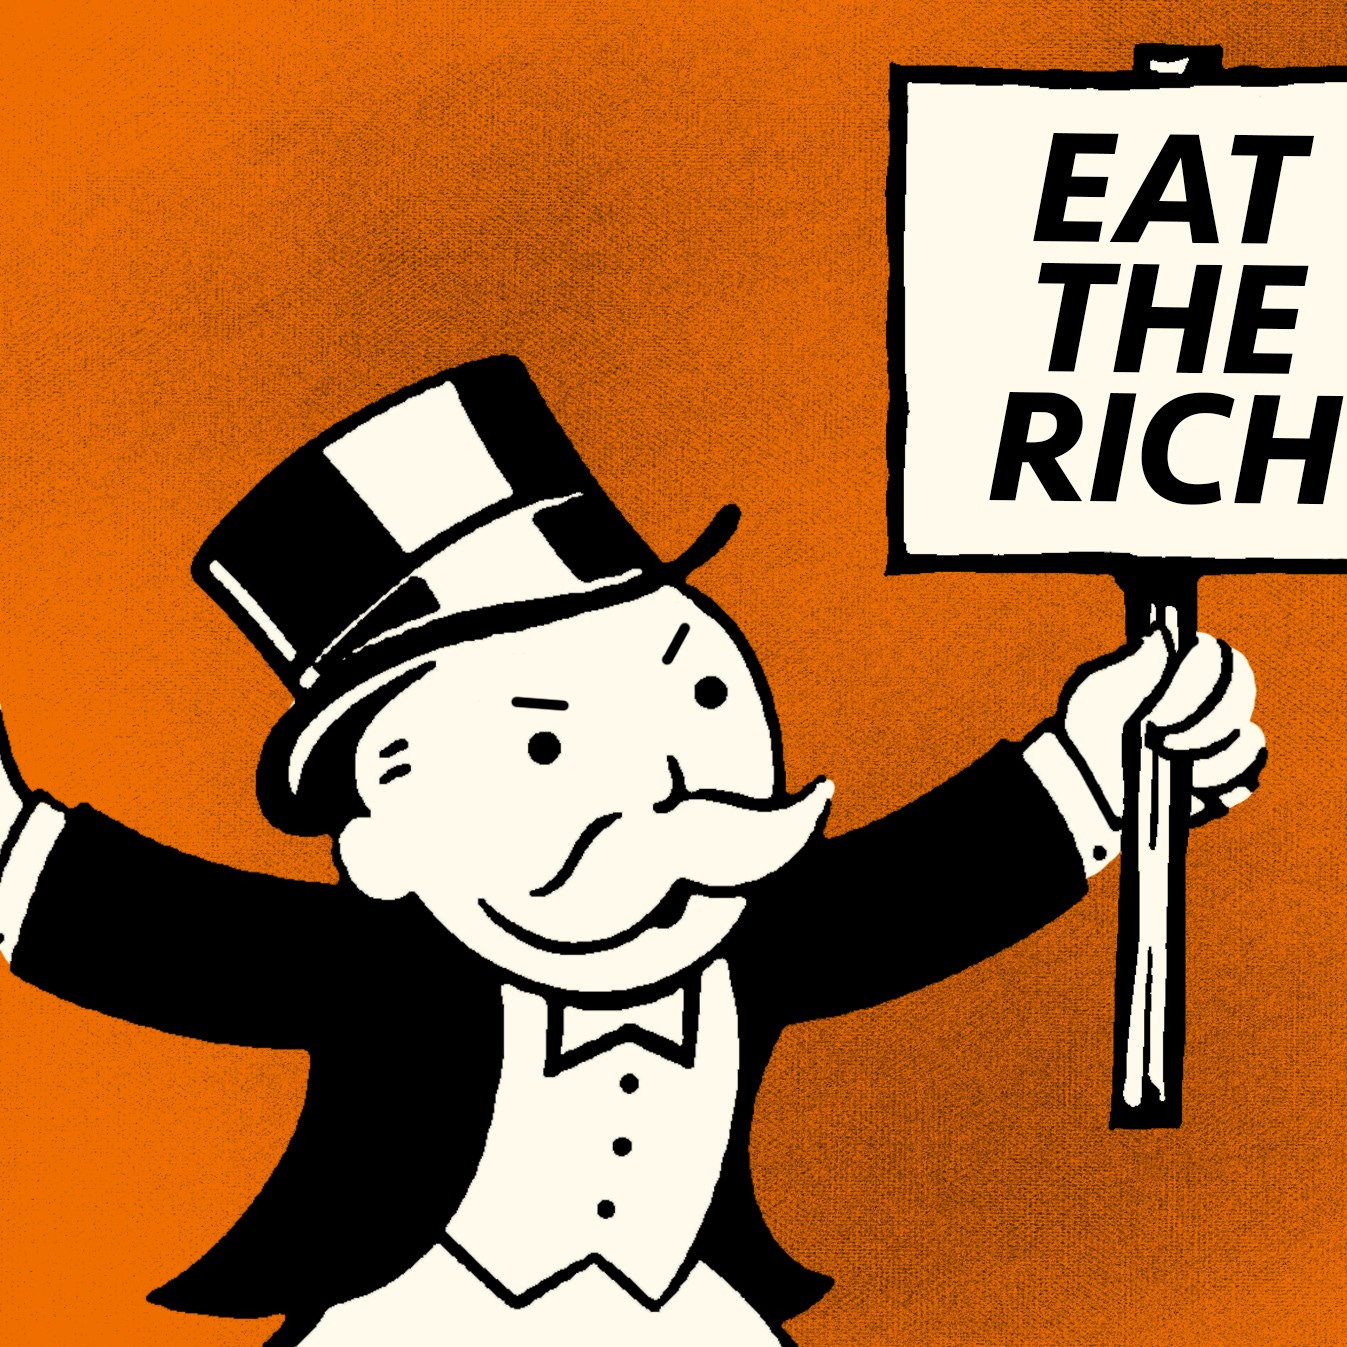 The Original Monopoly Was Deeply Anti-Landlord